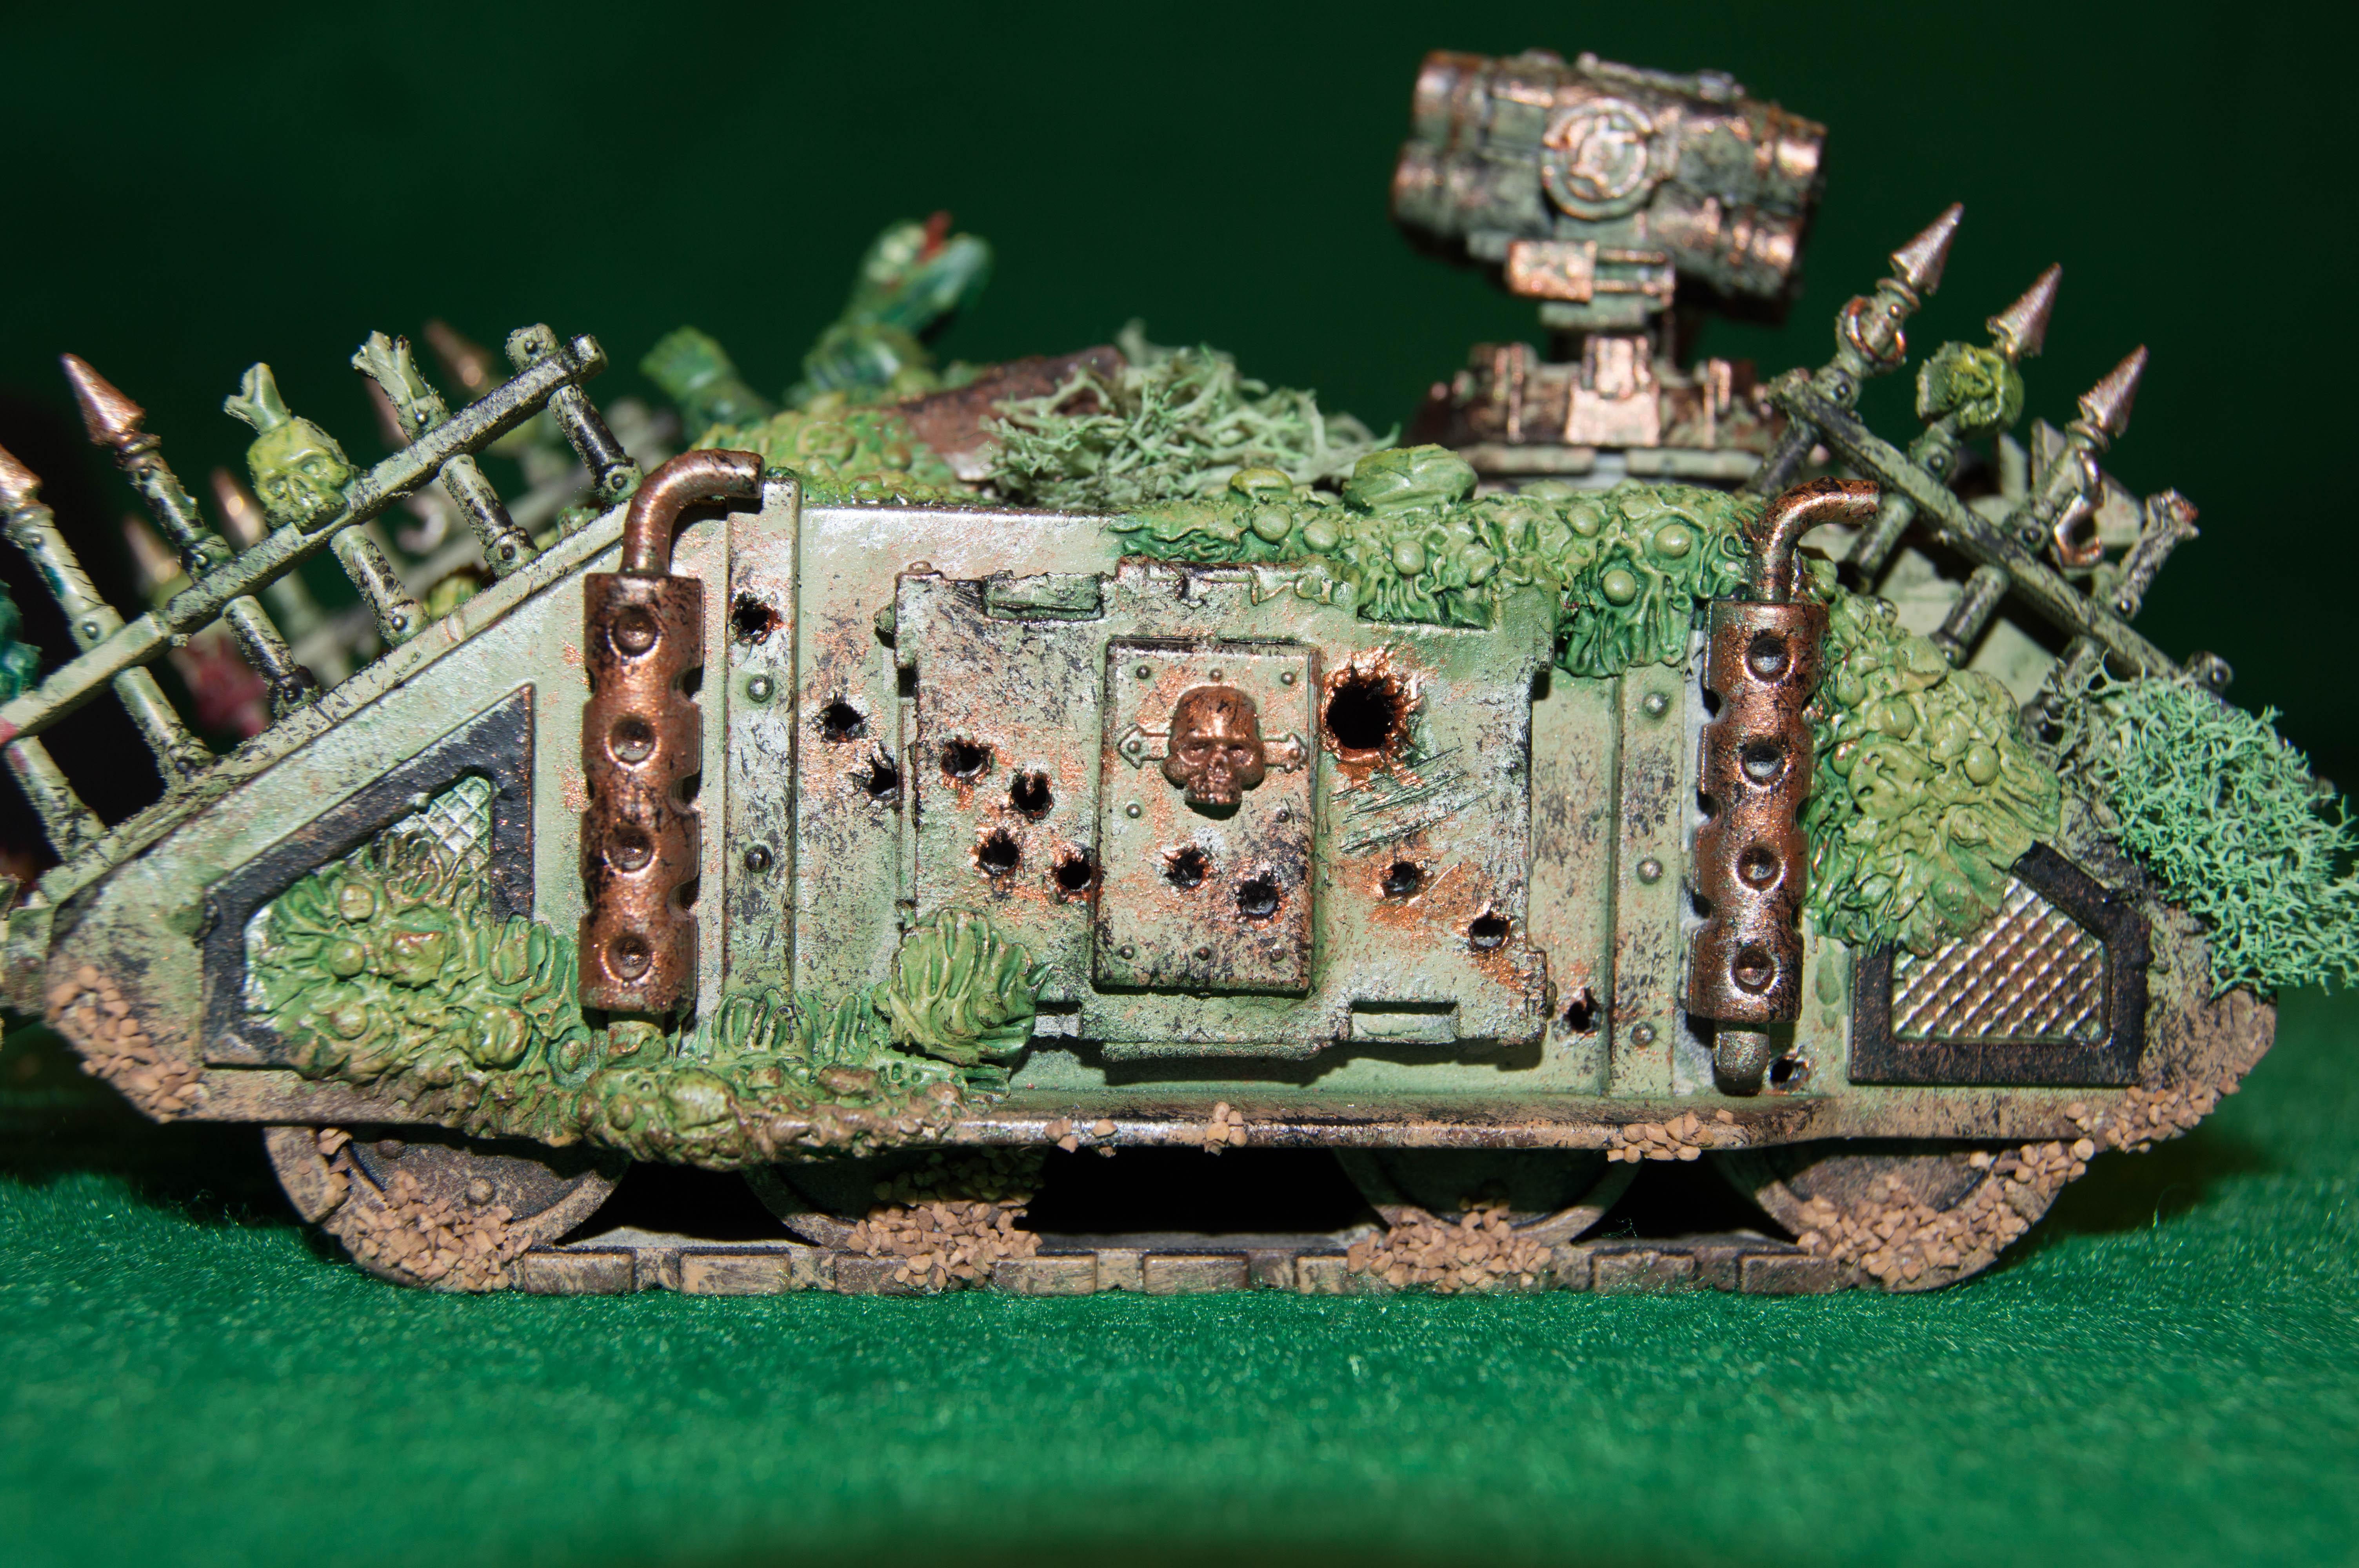 Chaos Daemons, Chaos Space Marines, Decay, Greenstuff, Nurgle, Rust, Transport, Vehicle, Warhammer 40,000, Wear, Weathered